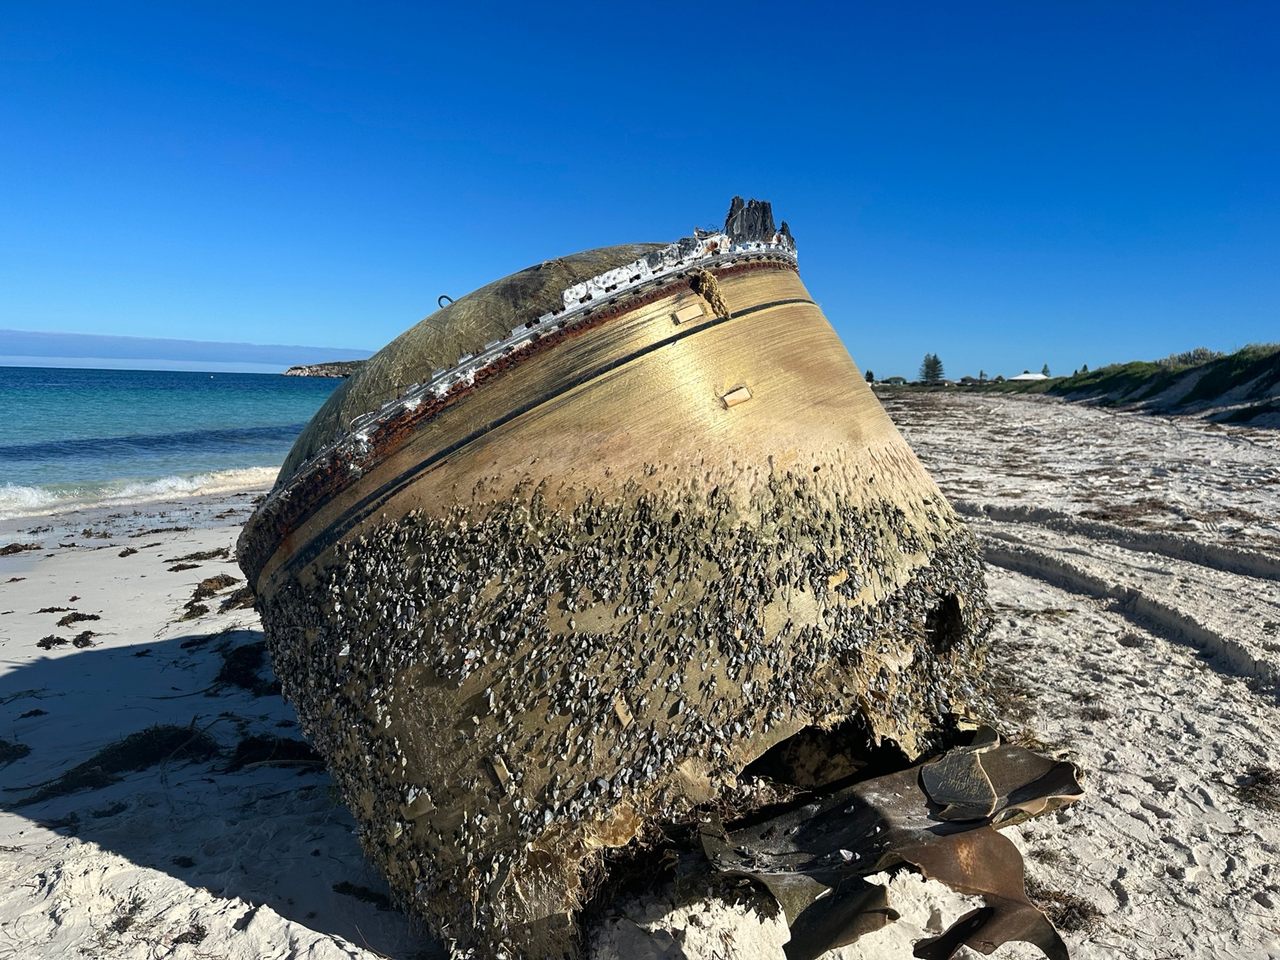 The mysterious metal cylinder on the shore of Western Australia.